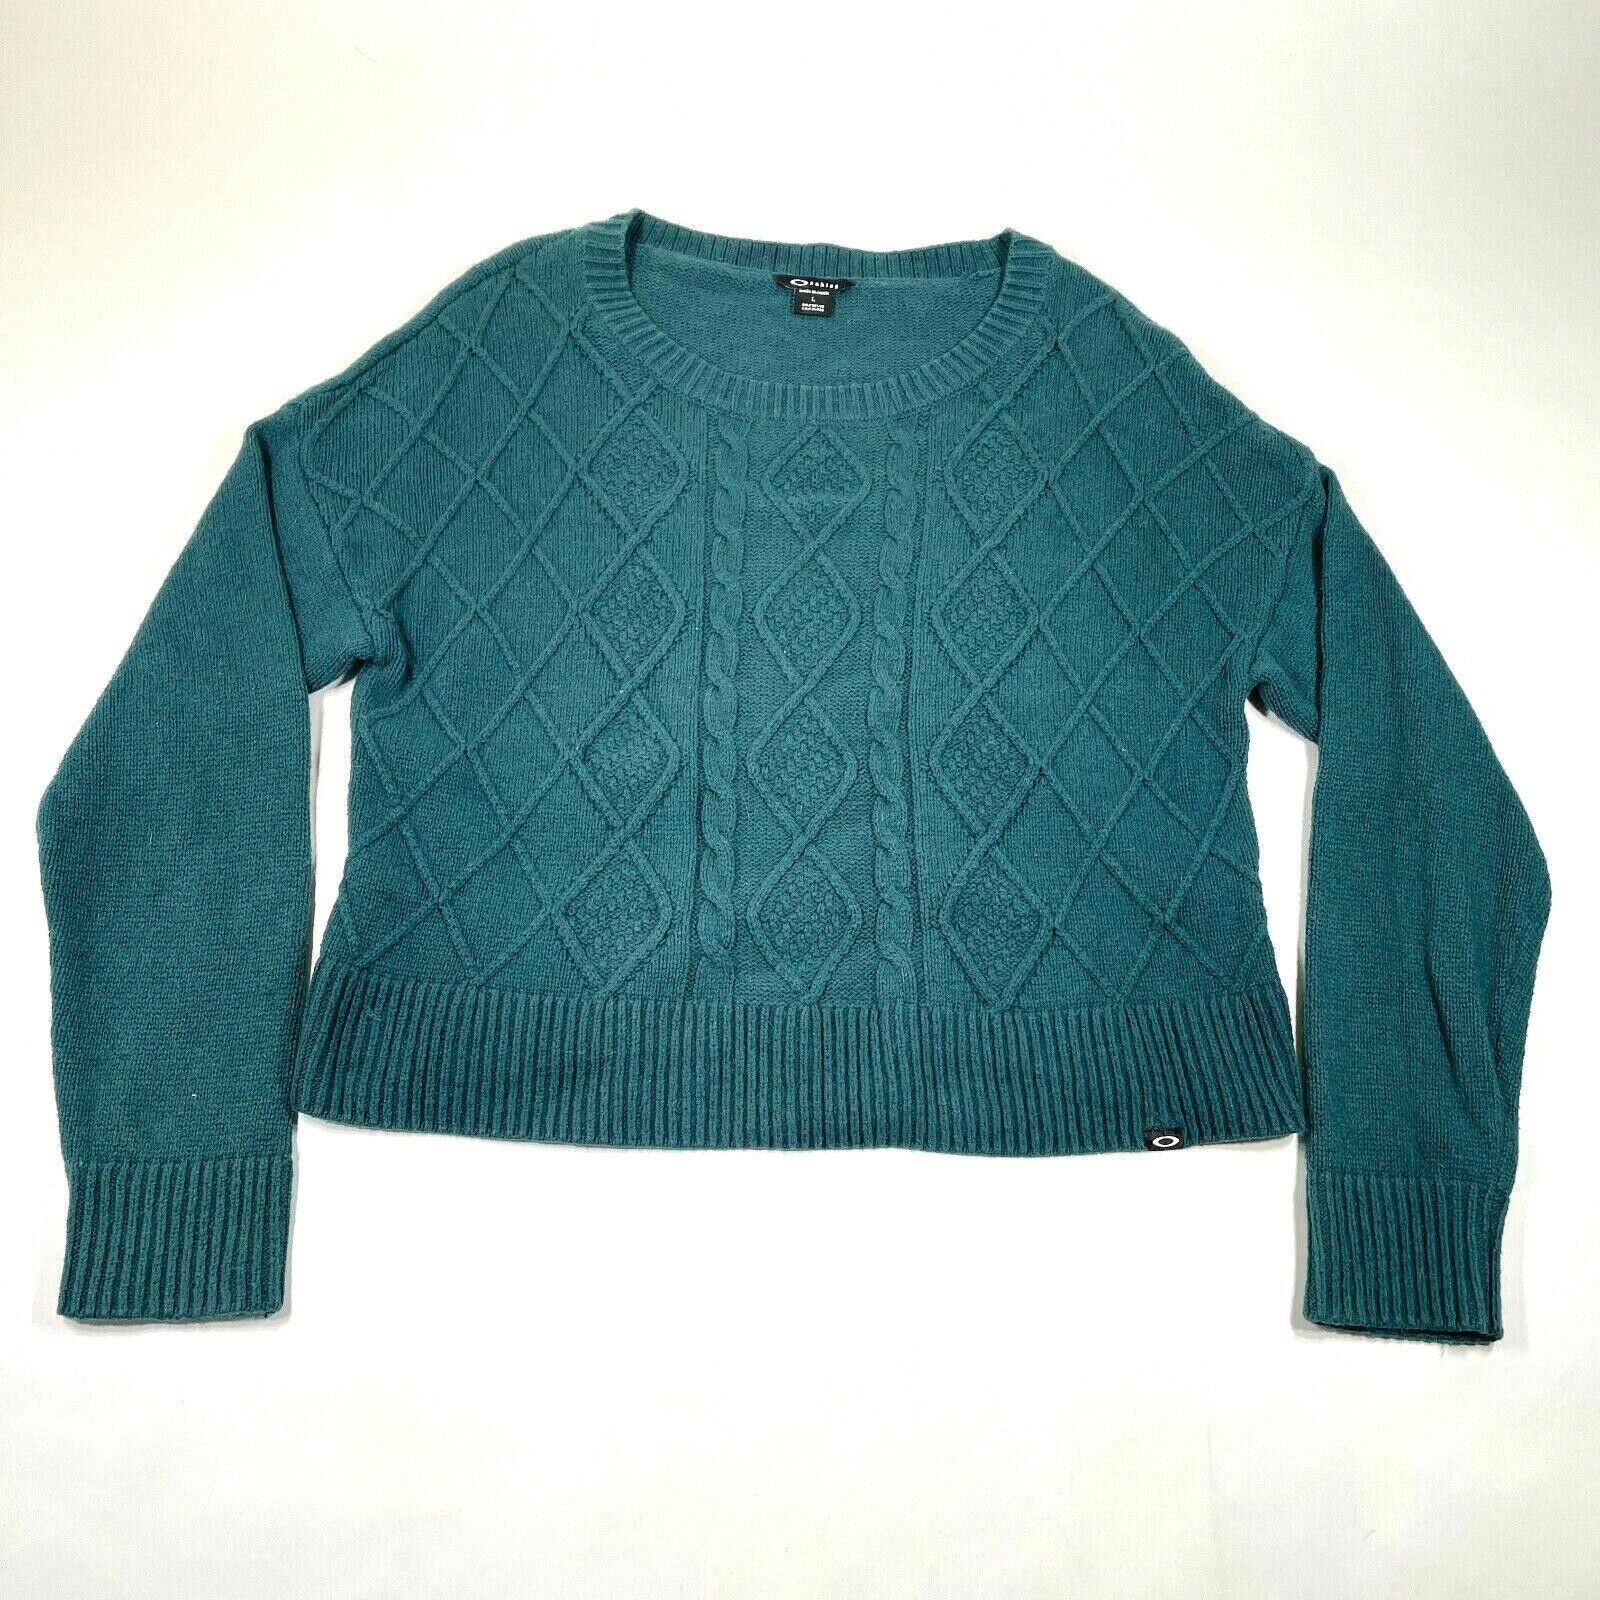 Primary image for Oakley Pullover Sweater Womens L Turquoise Blue Cable Knit Angora Crew Neck